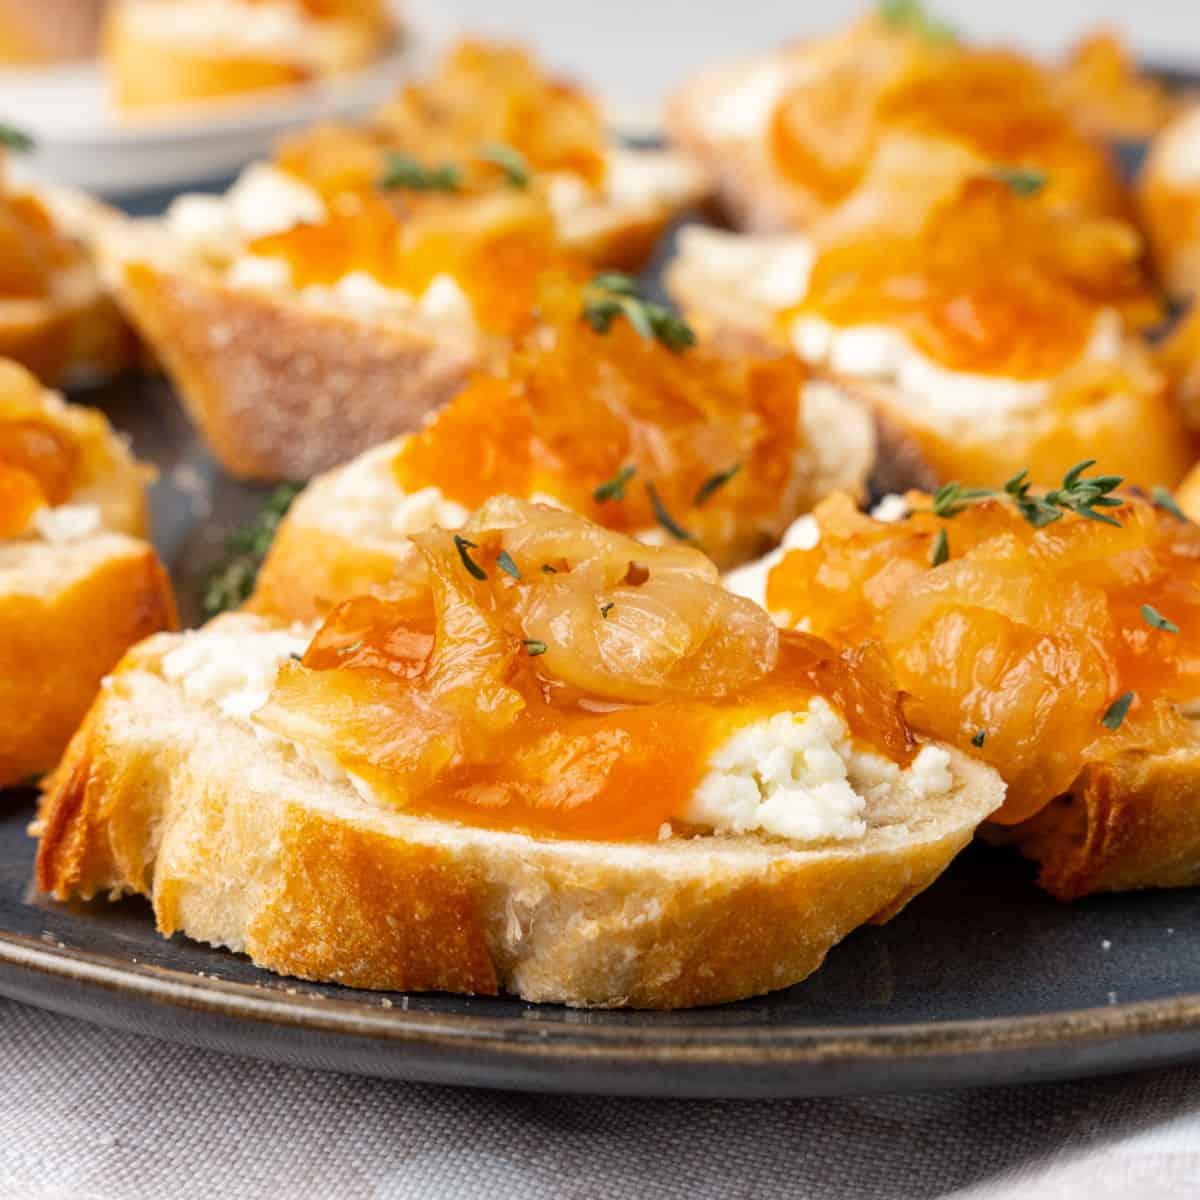 Caramelized Onion and Goat Cheese Pintxo